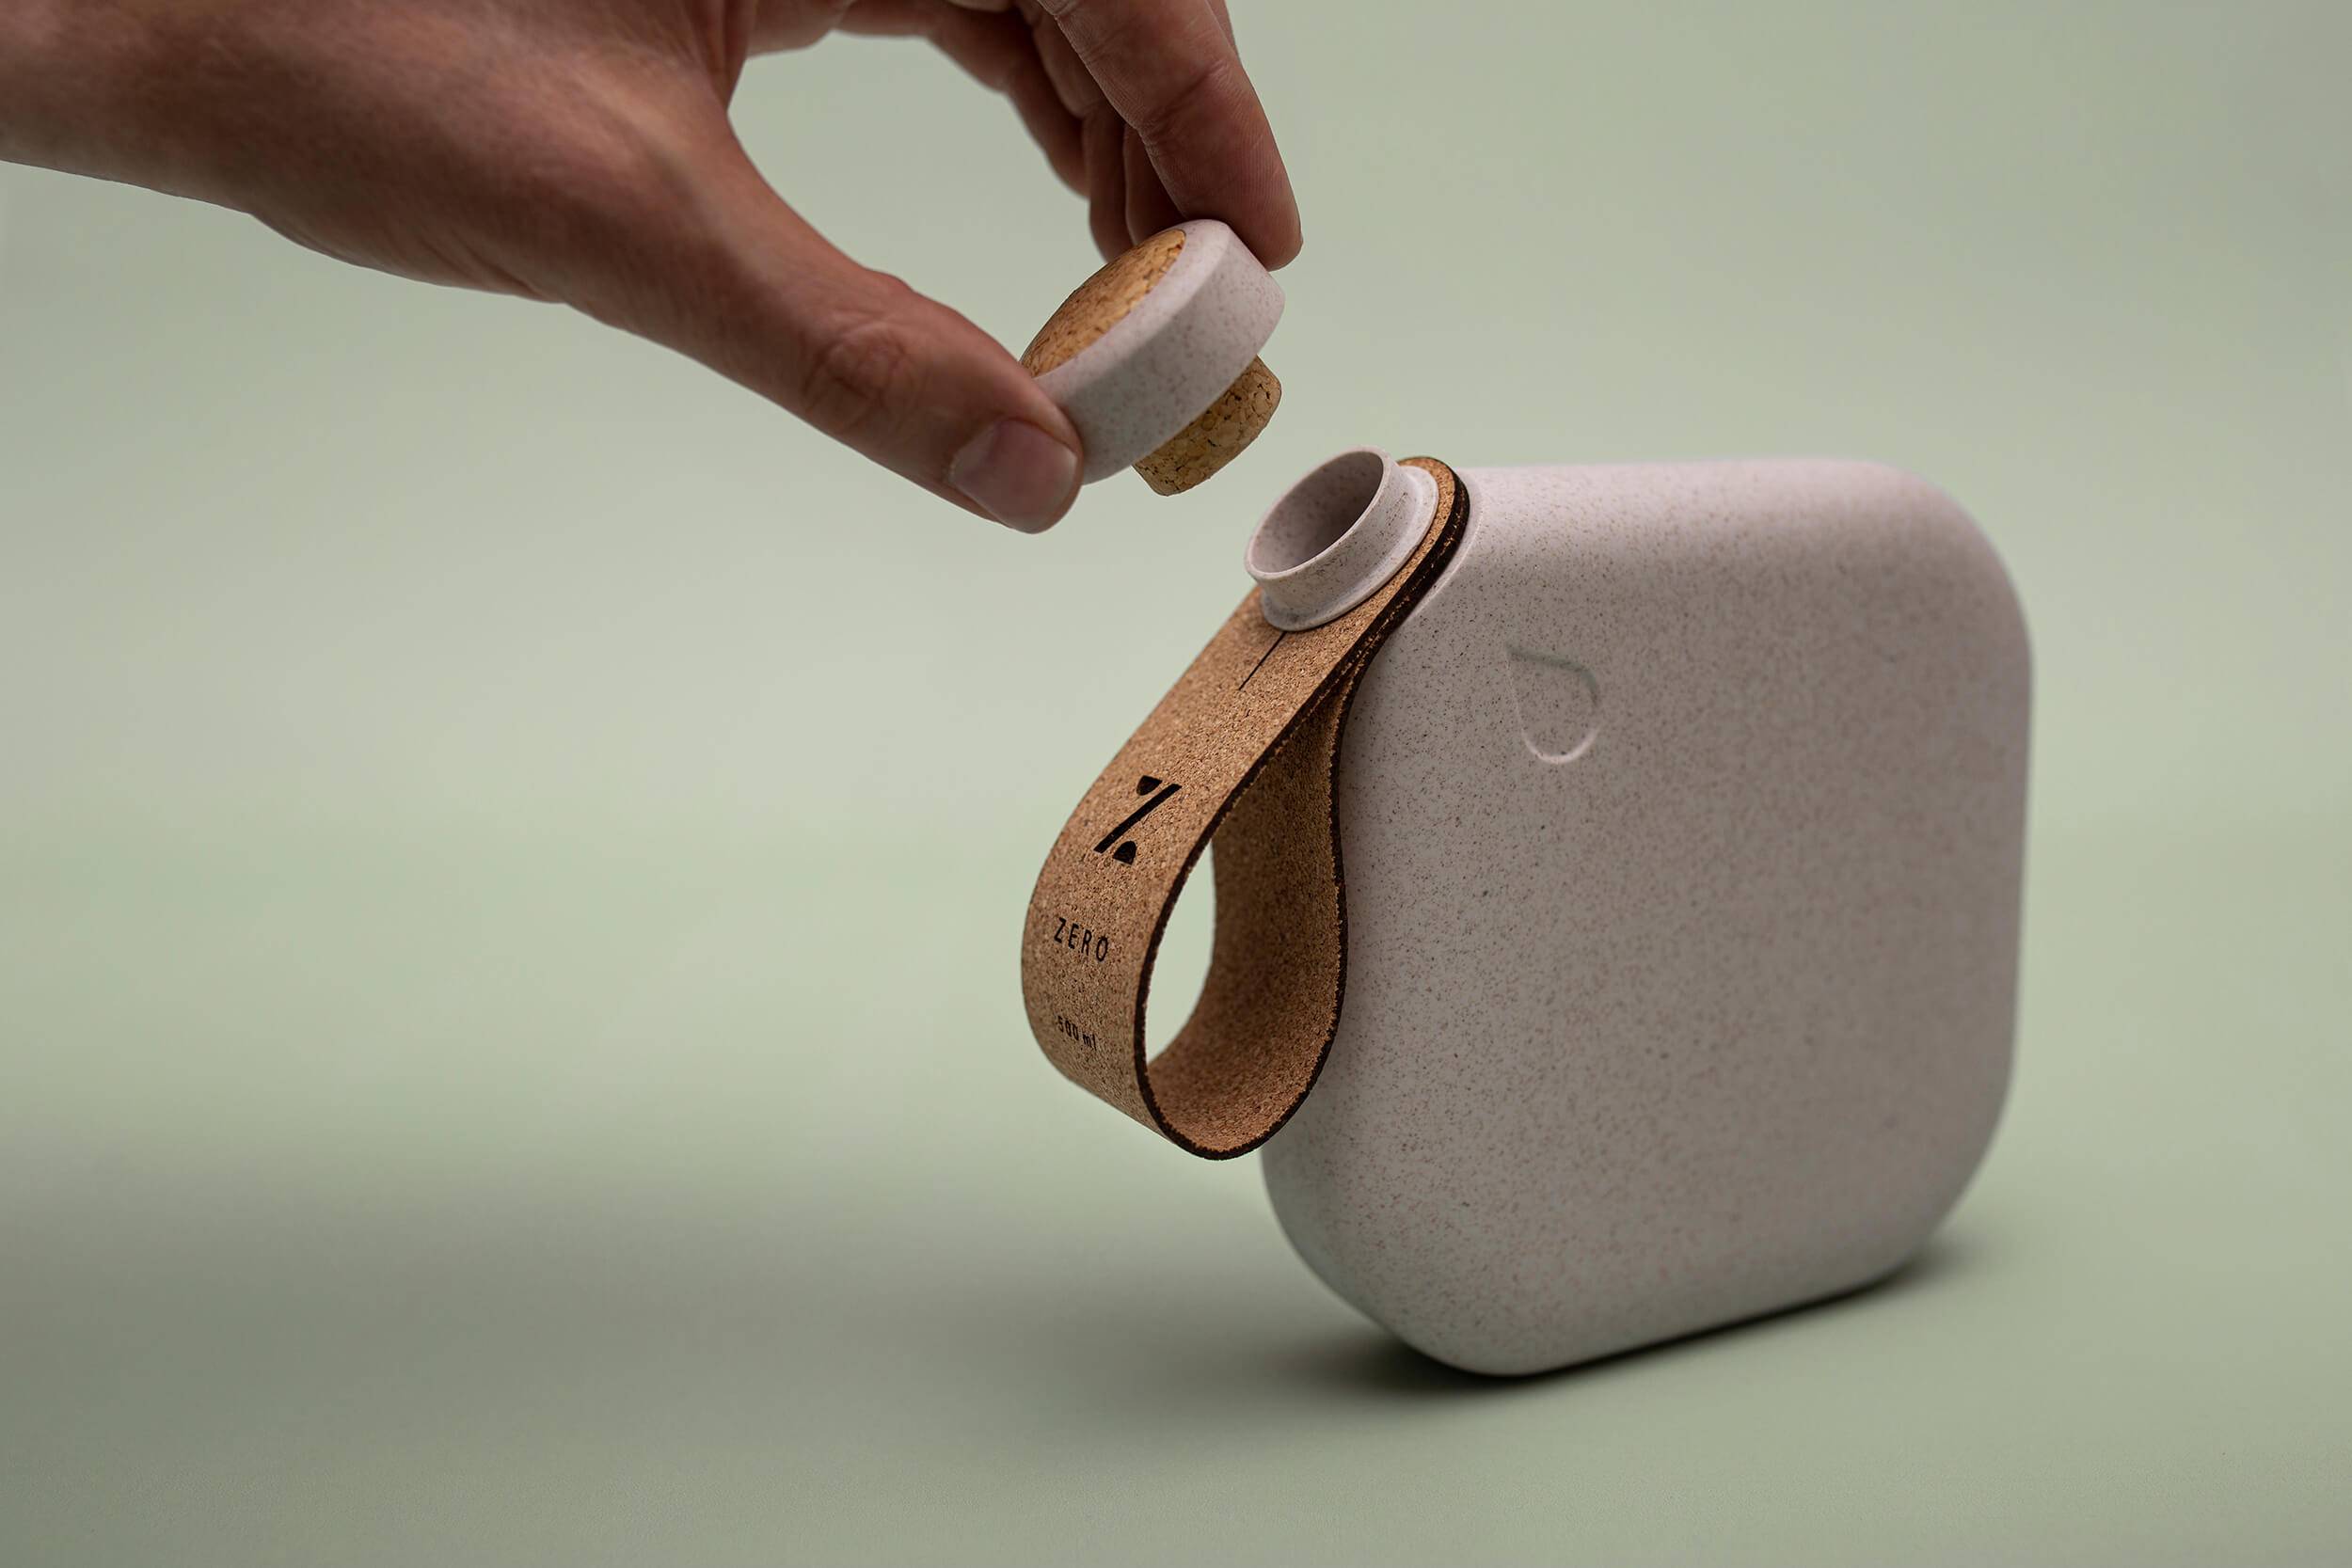 A hand uncorking a reusable water bottle made from sustainable materials